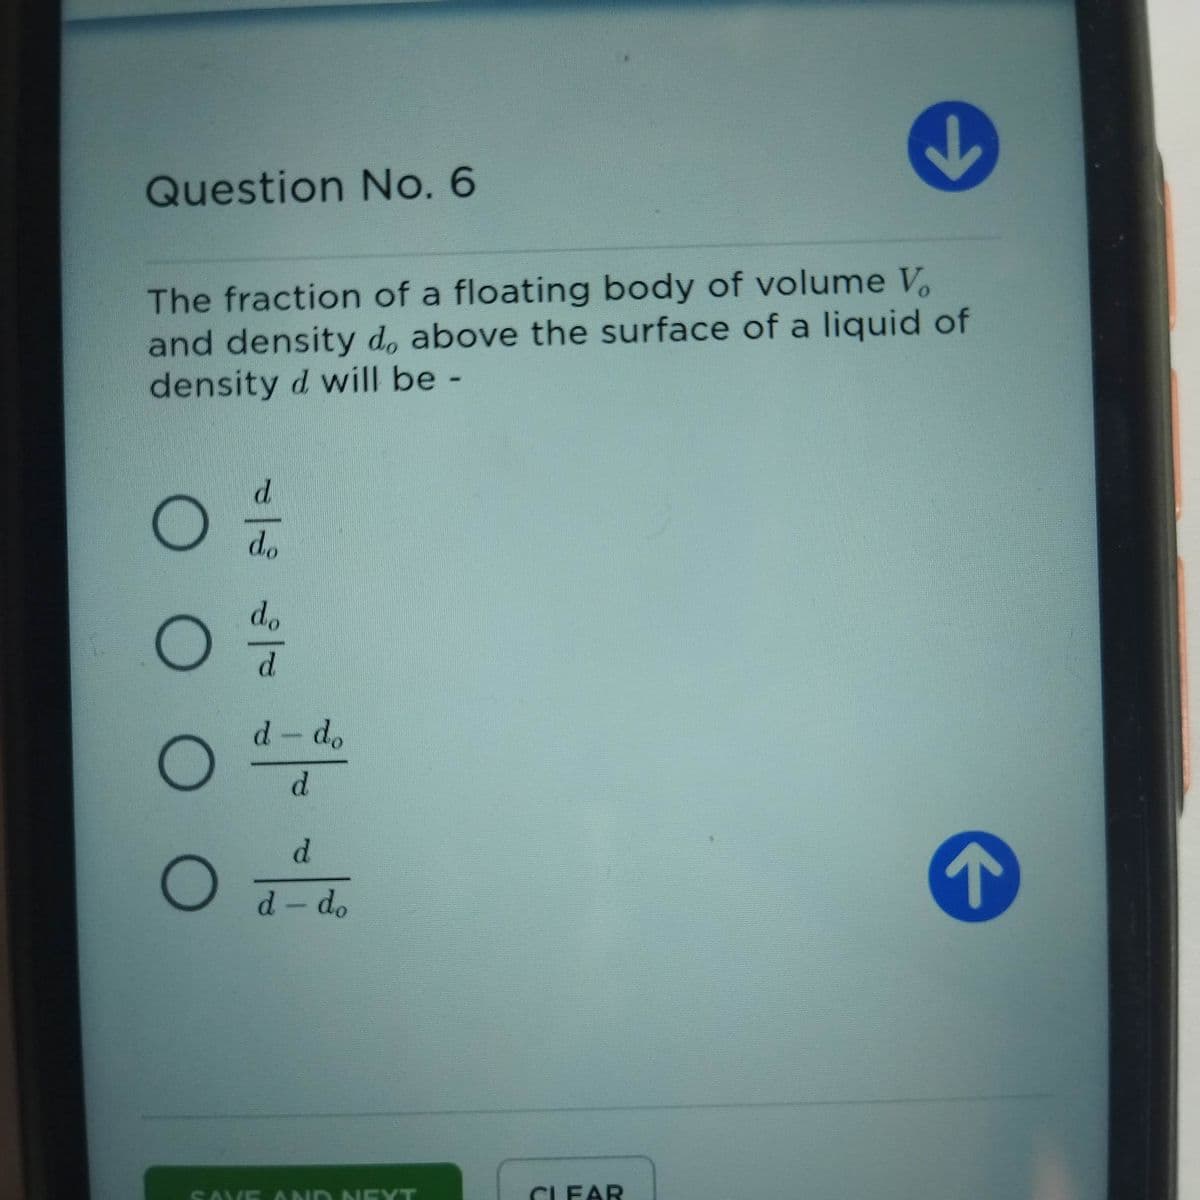 Question No. 6
The fraction of a floating body of volume V.
and density d, above the surface of a liquid of
density d will be -
d.
do
do
d.
d-do
d.
d.
d- do
SAVE AND NE YT
CLEAR
O O
